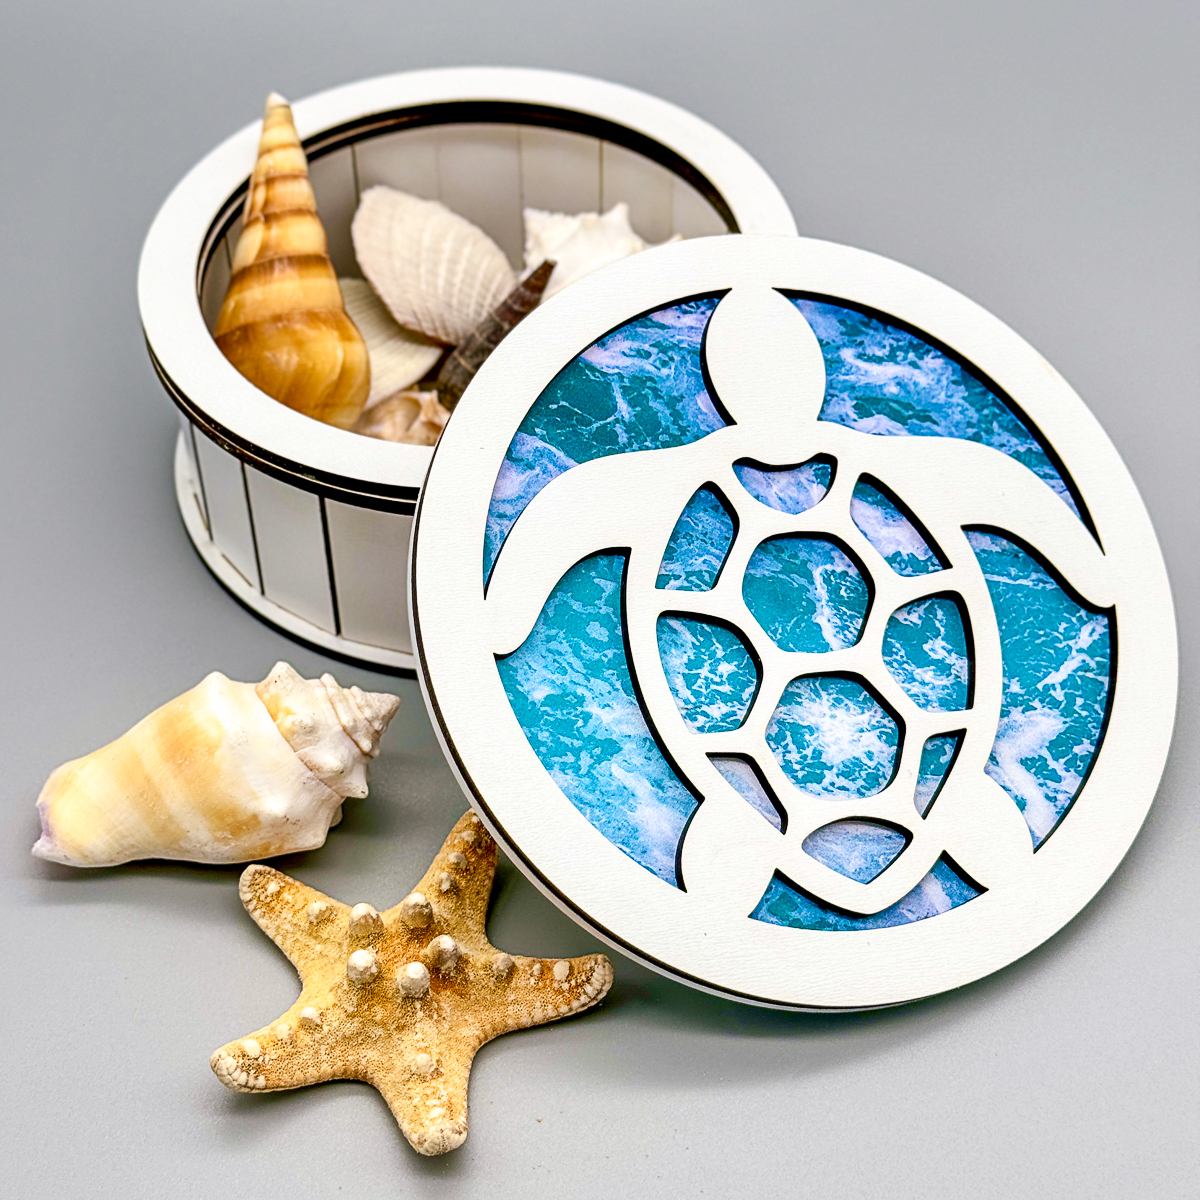 DIY round wood box with sea turtle design on lid filled with seashells